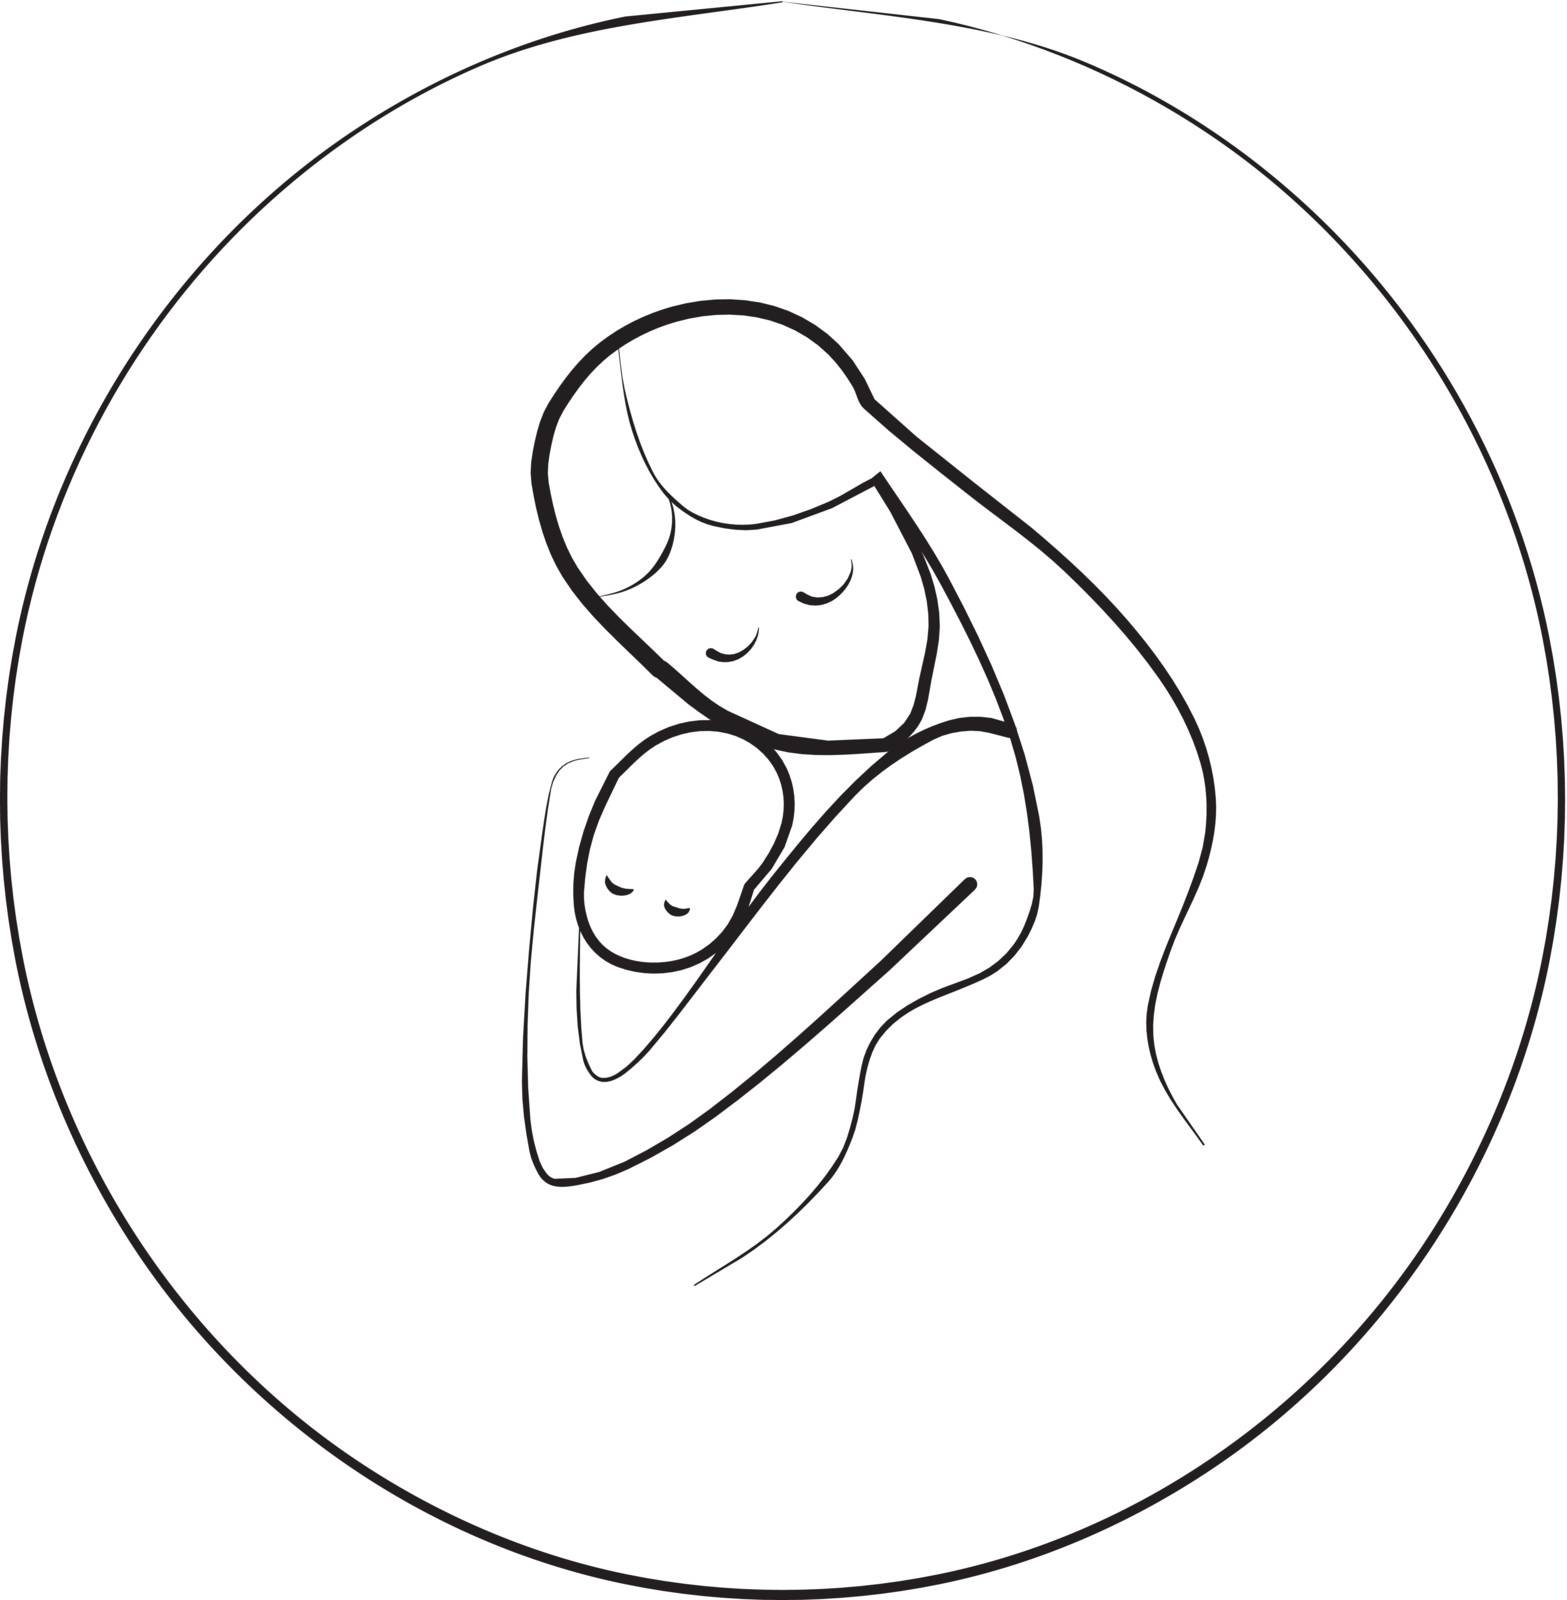 mother and child concept illustration